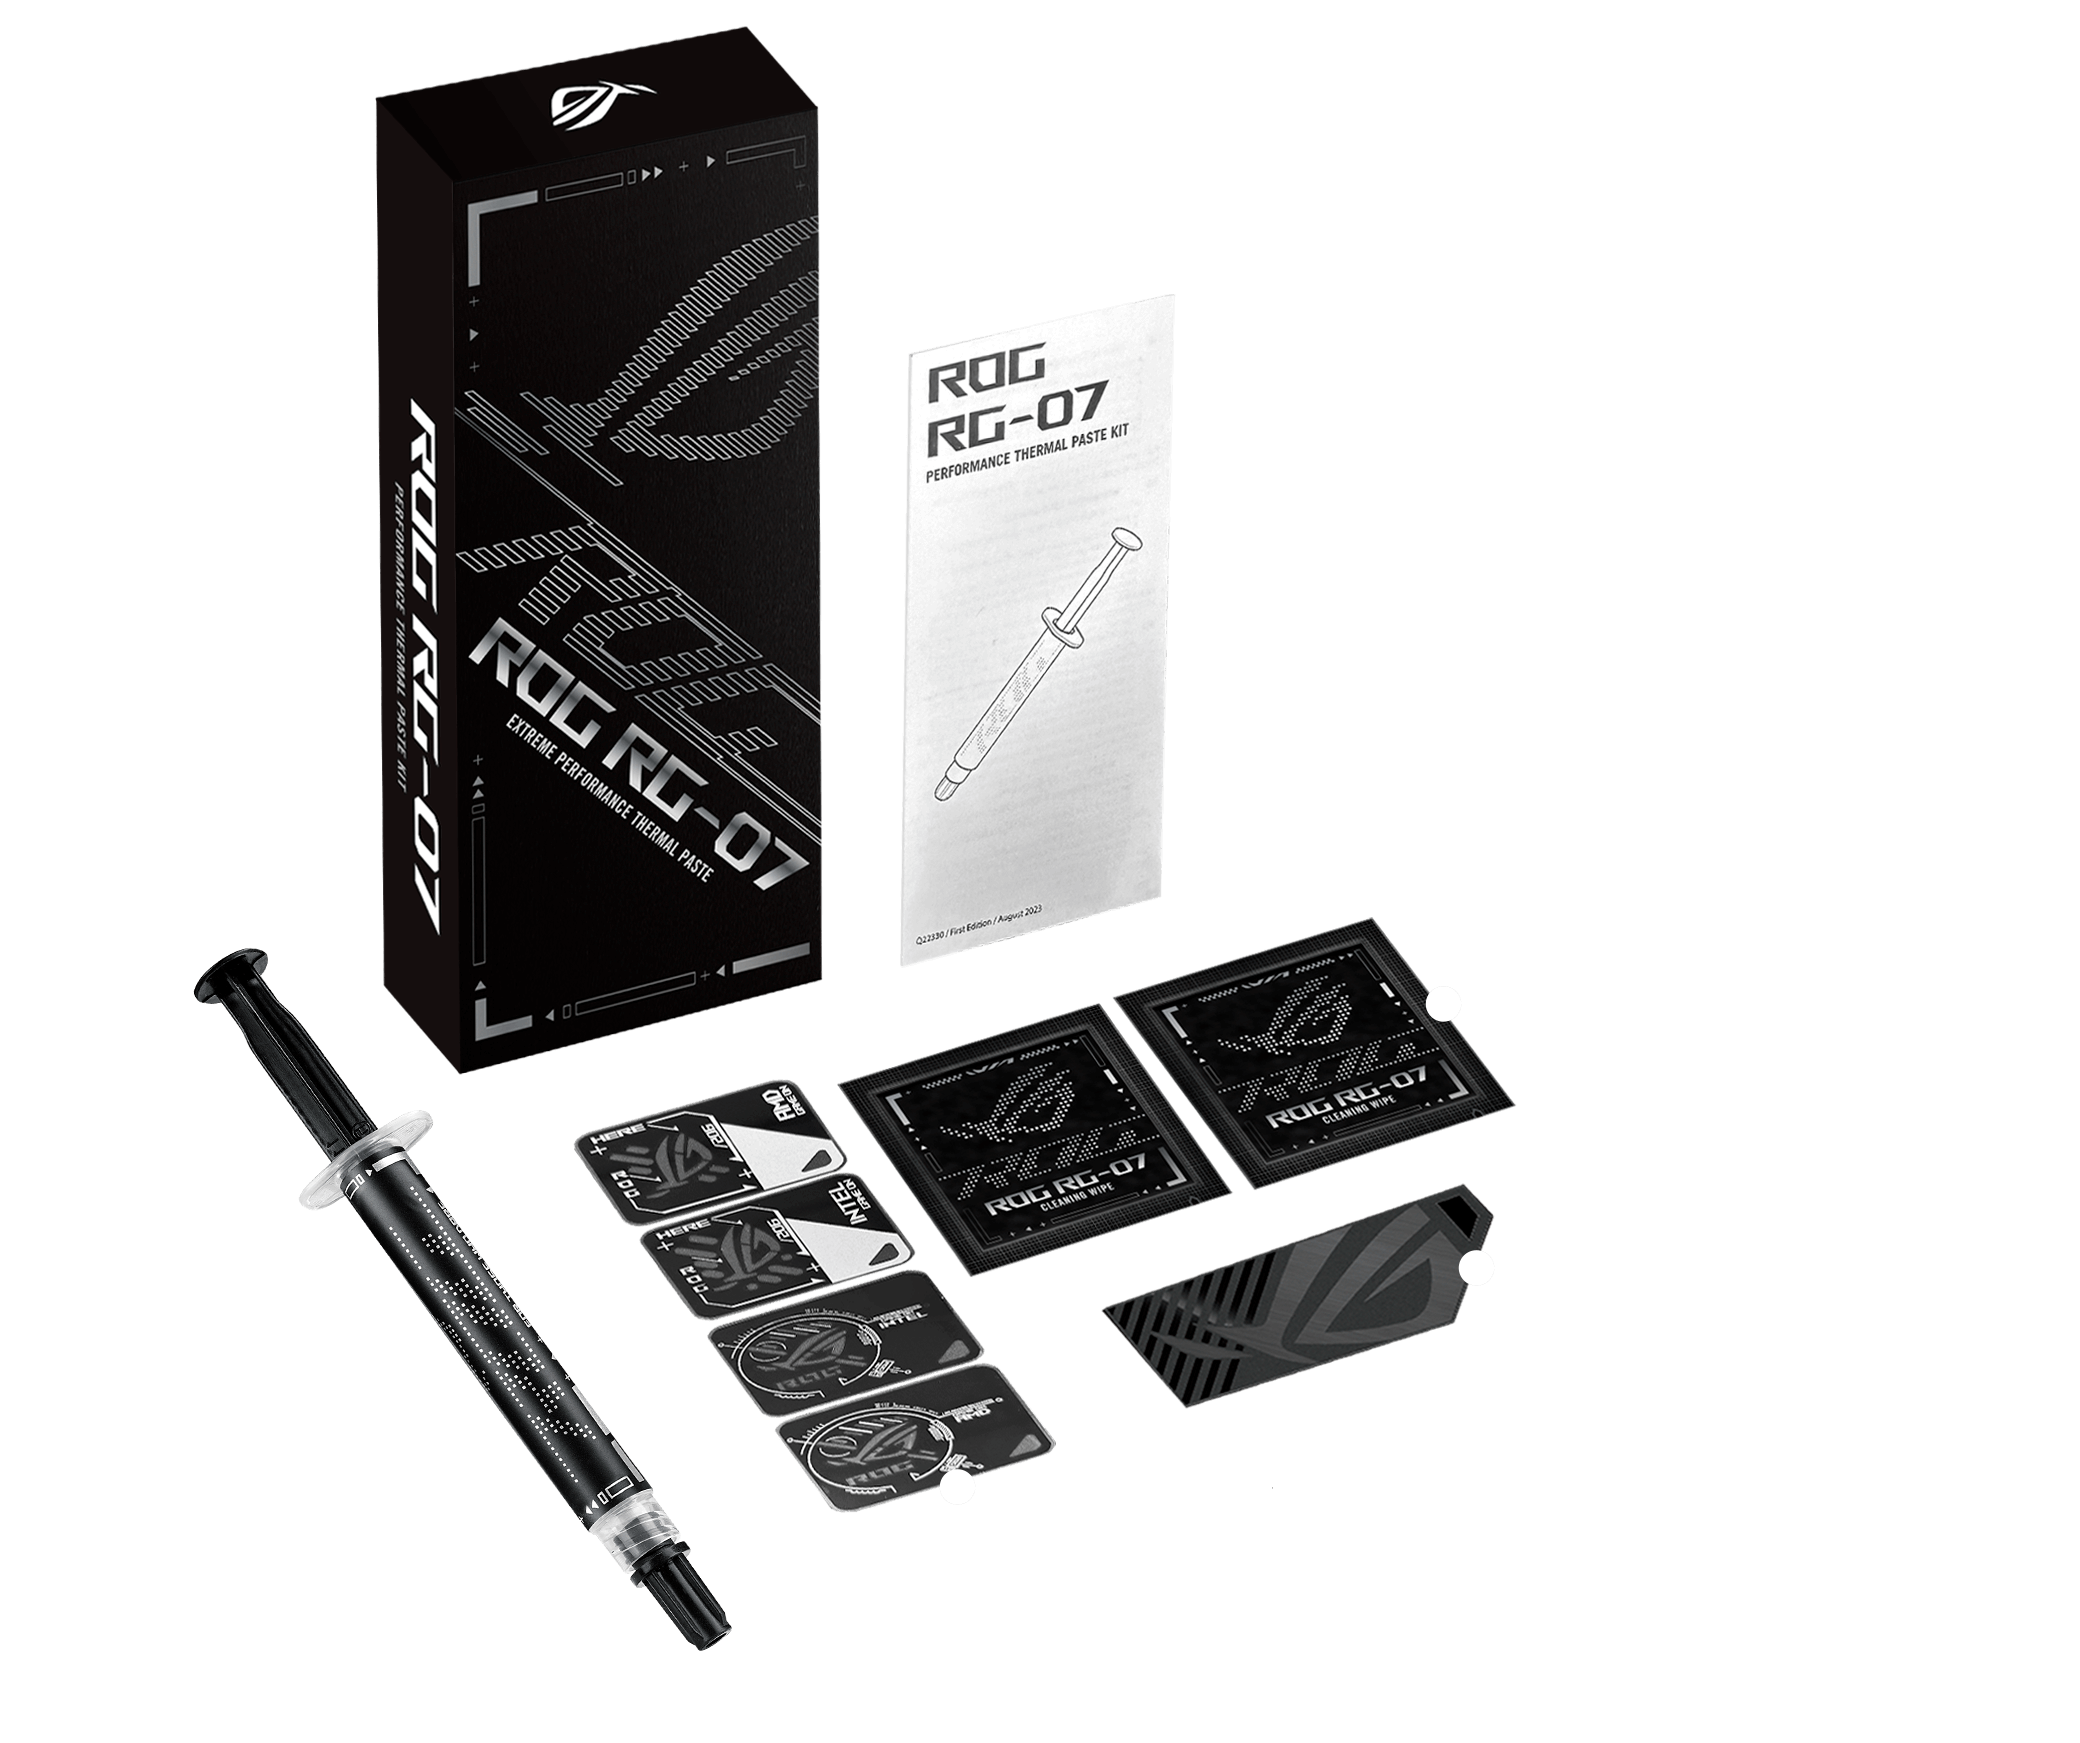 The full contents of the ROG RG-07 Performance Thermal Paste Kit.